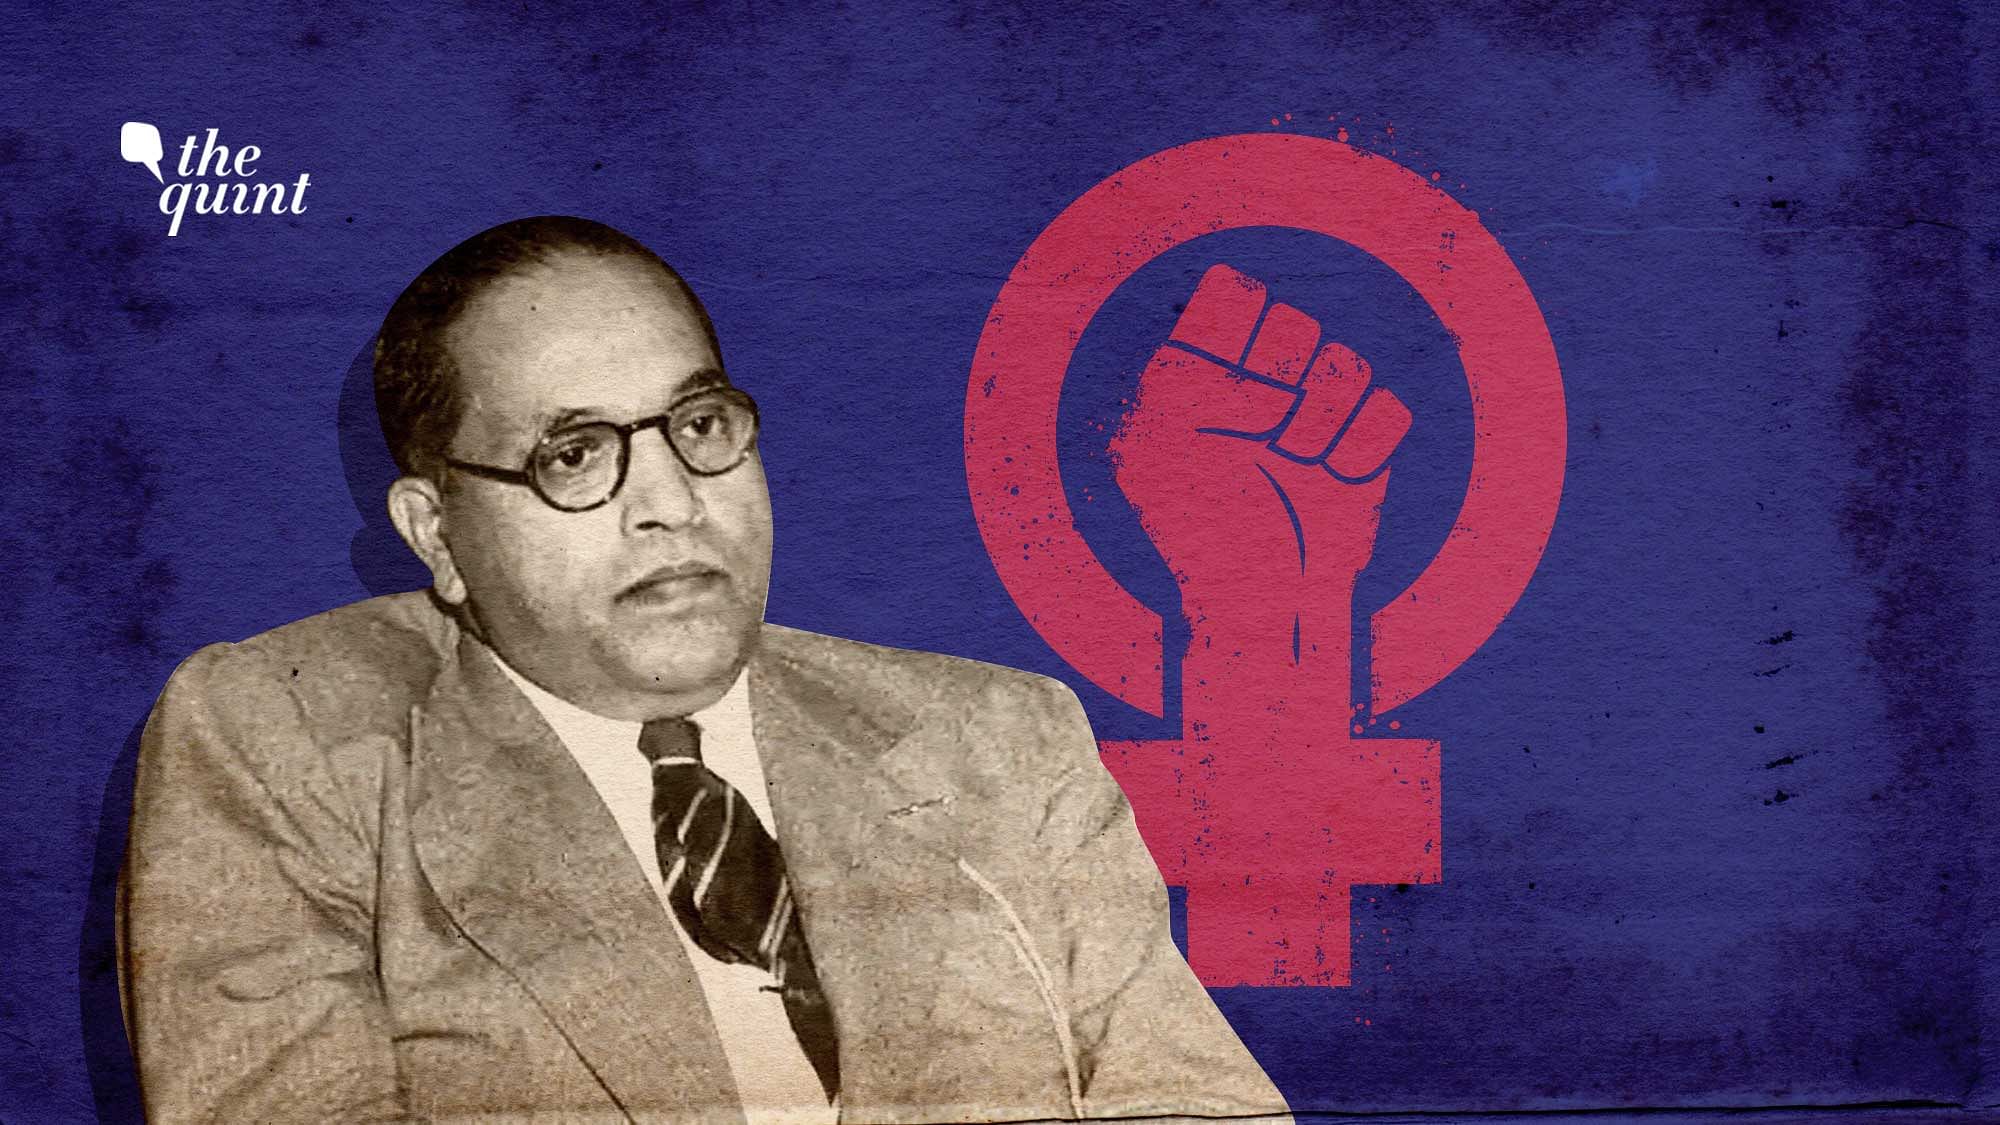 Image of BR Ambedkar and symbol of feminism used for representation.